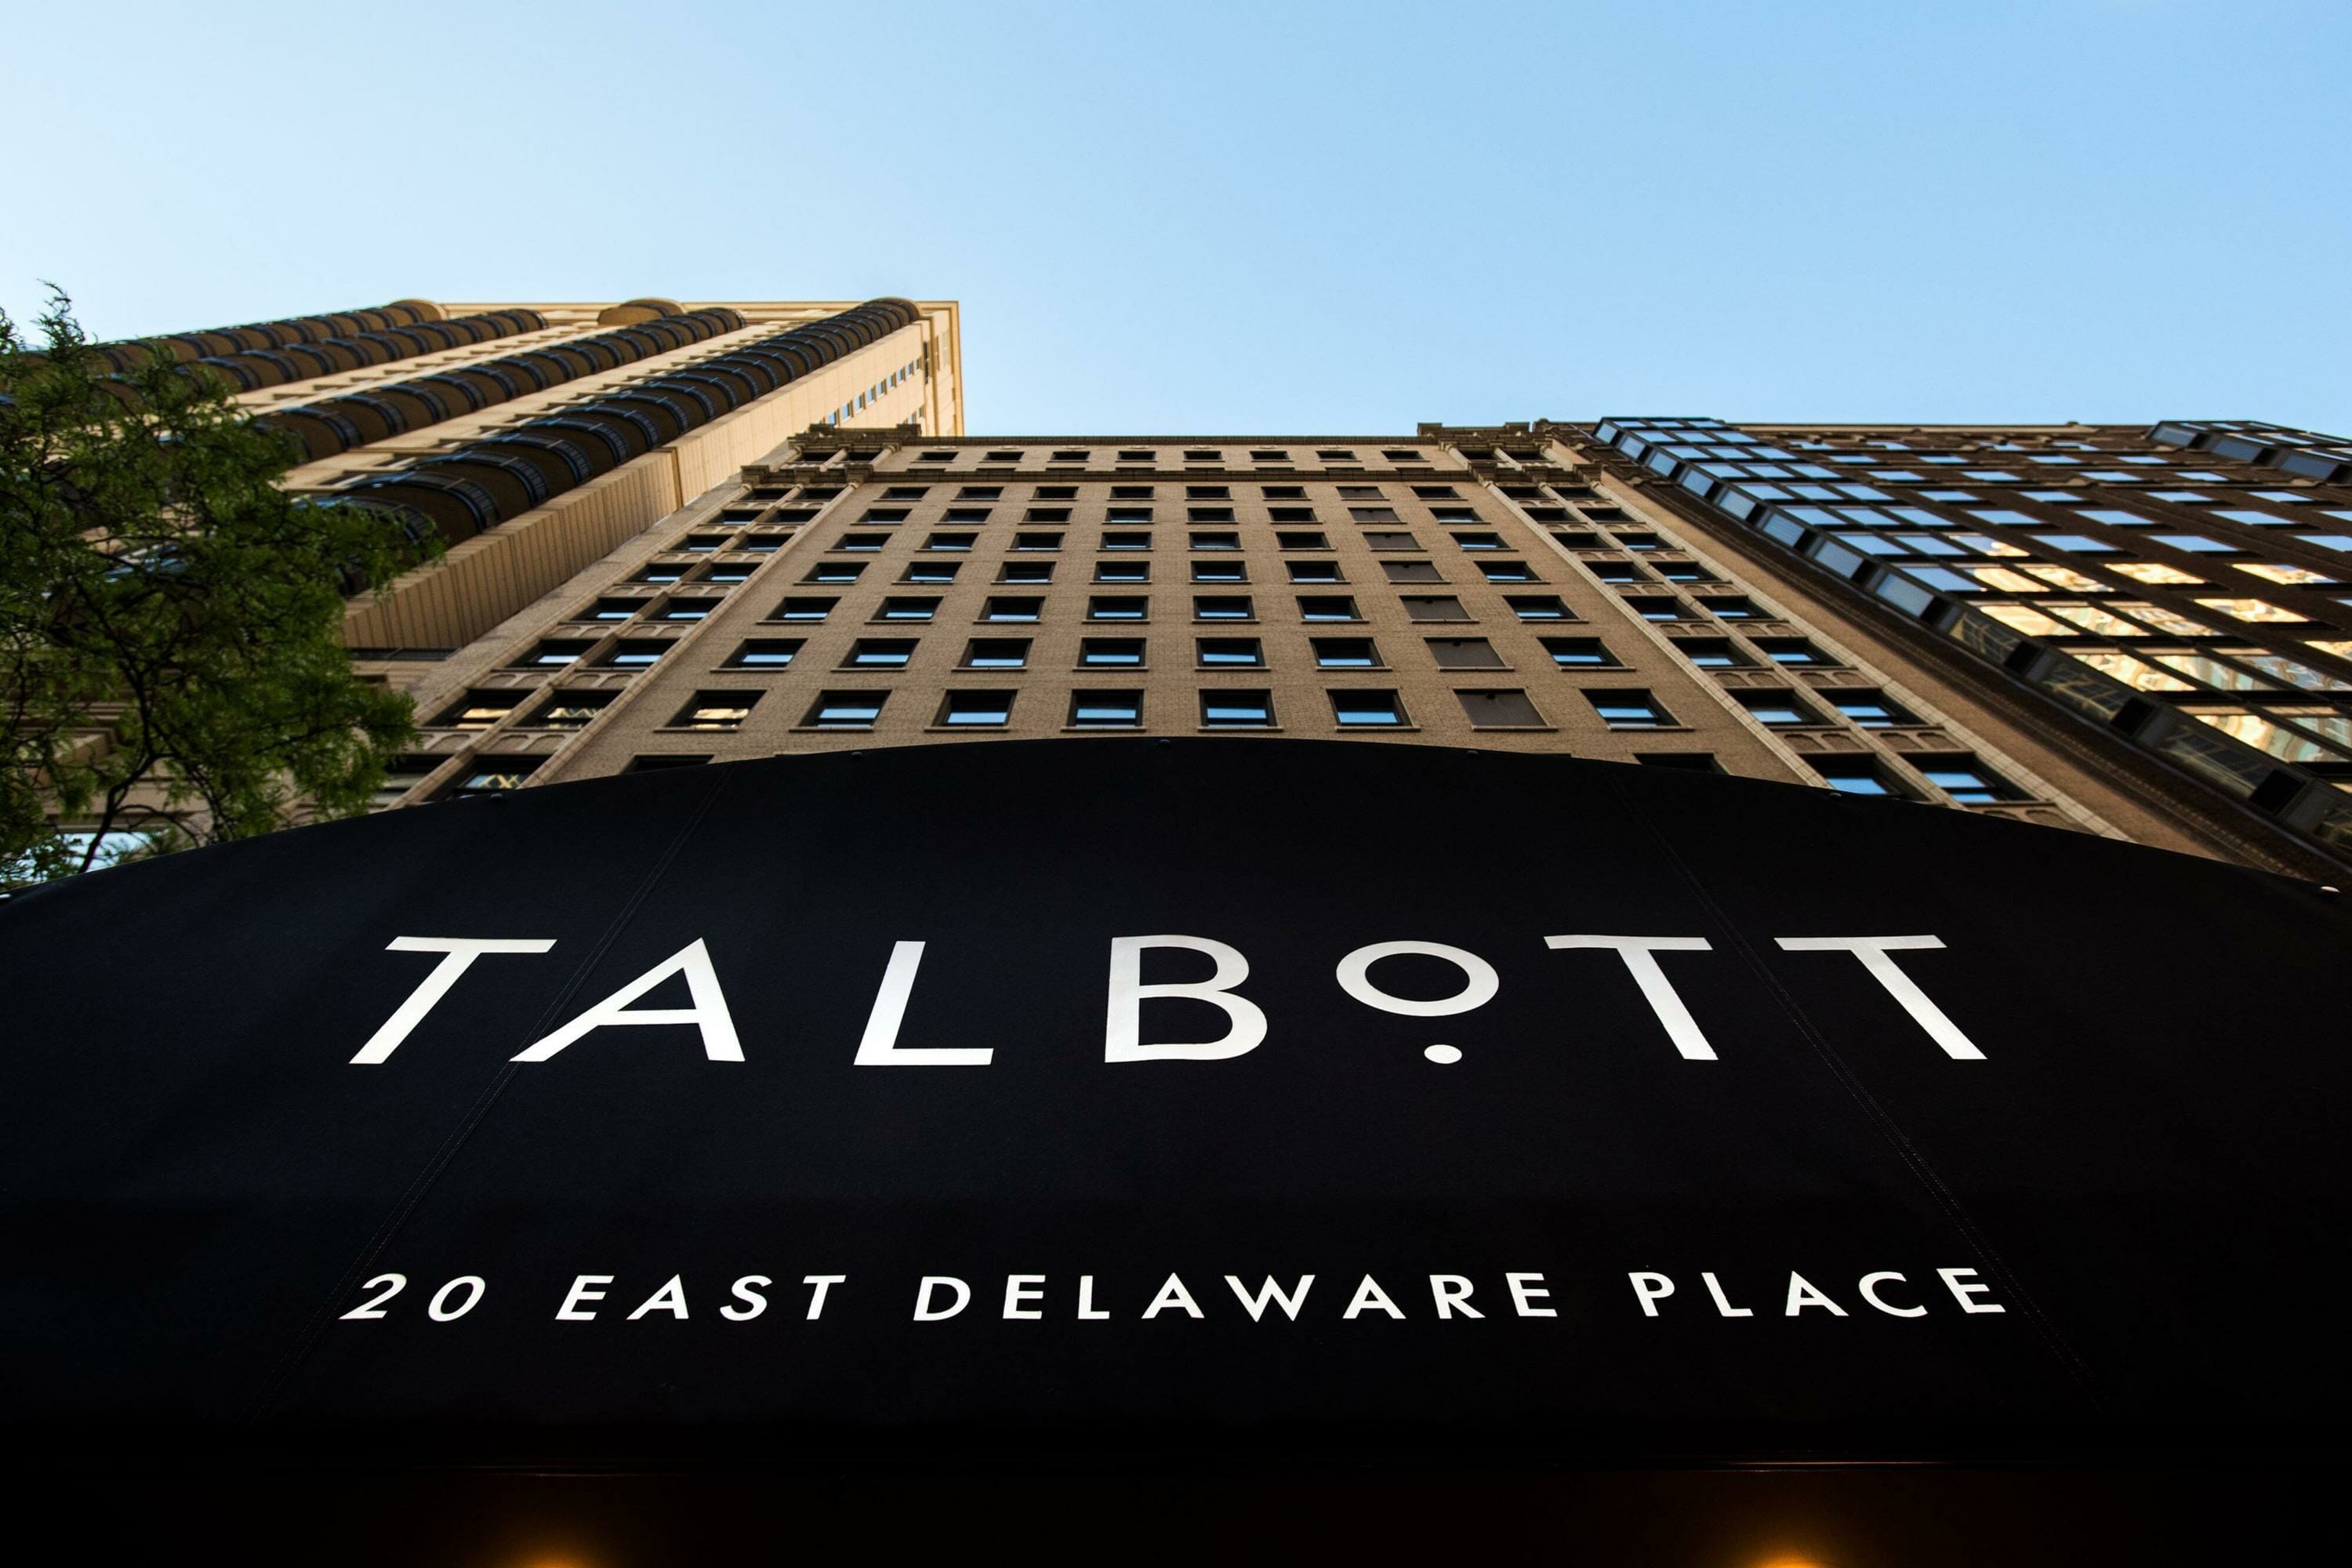 Building view of The Talbott Hotel